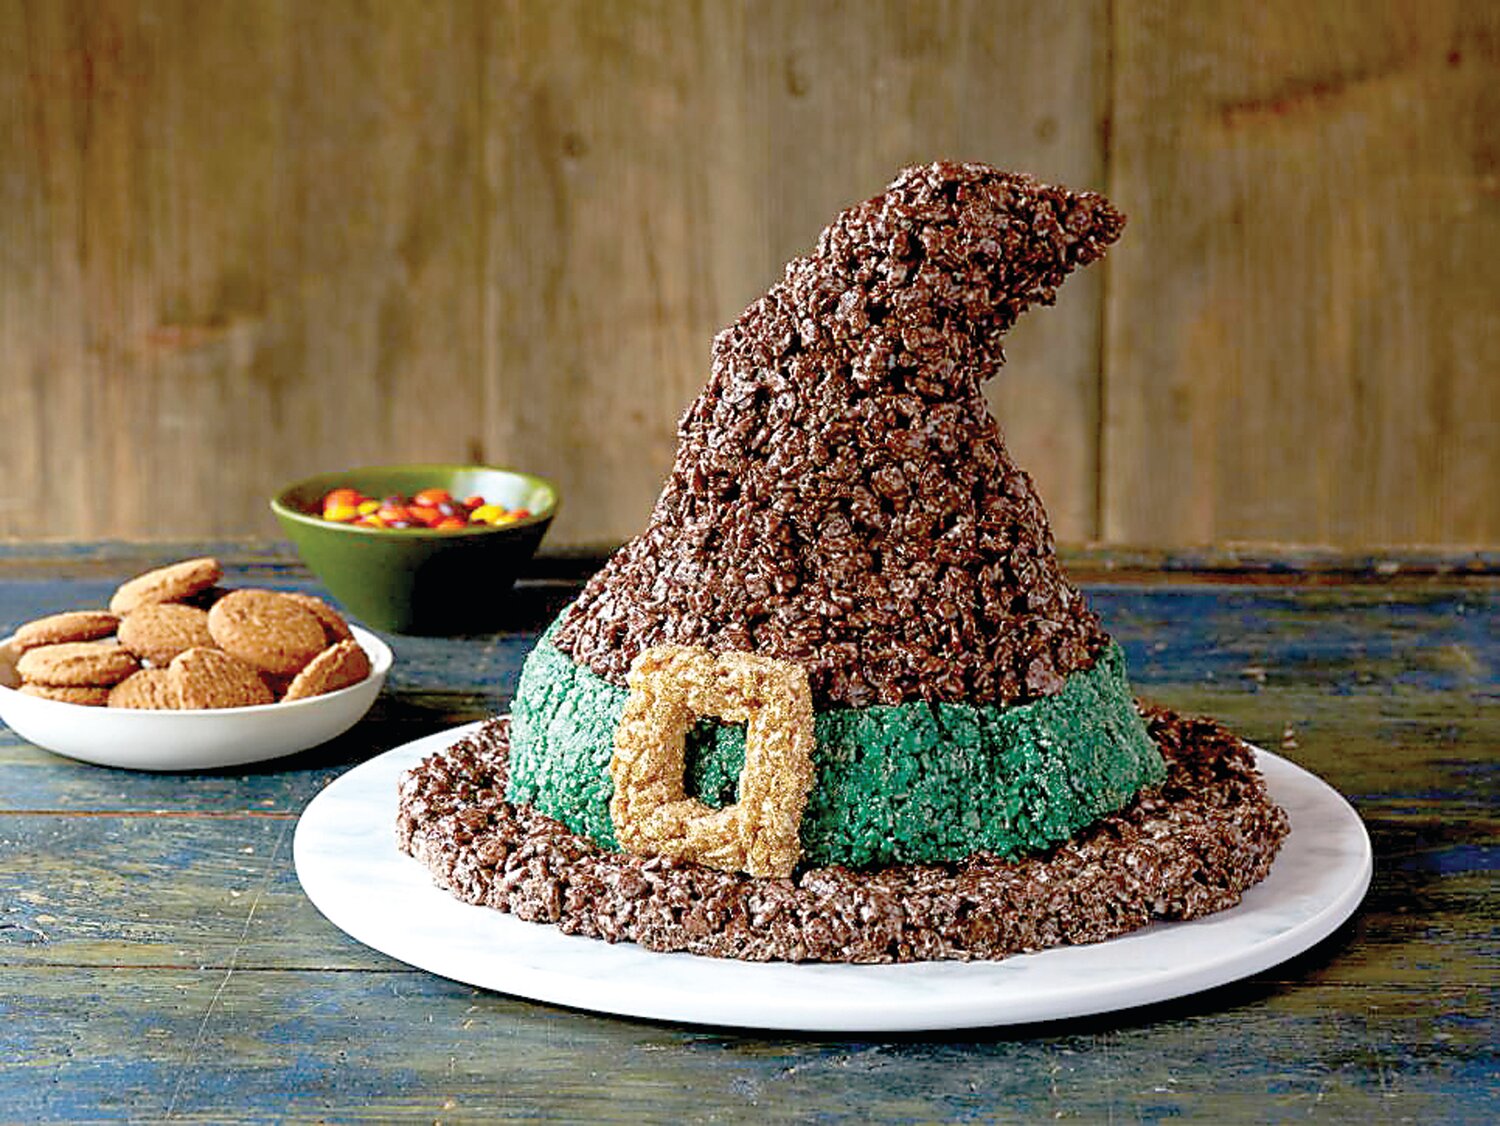 Chocolate crisped rice cereal becomes a witch’s hat with a little ingenuity mixed with melted marshmallow and food coloring.